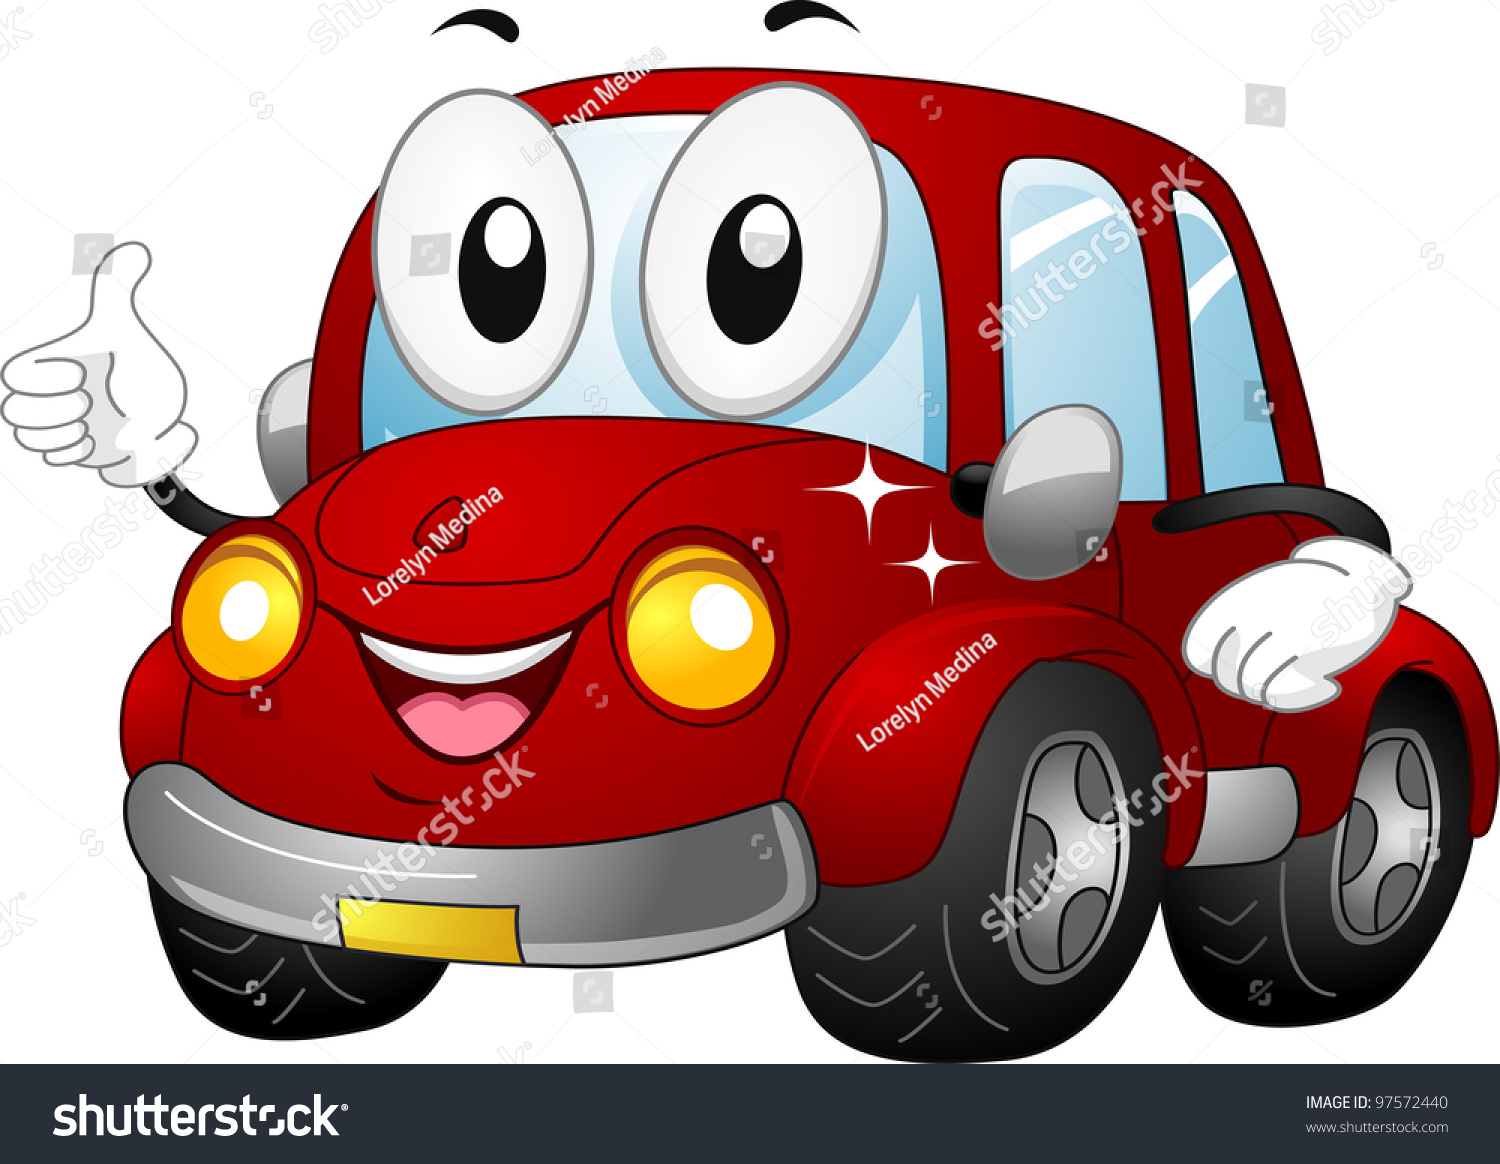 Illustration Of A Car Mascot Giving A Thumbs Up - 97572440 : Shutterstock